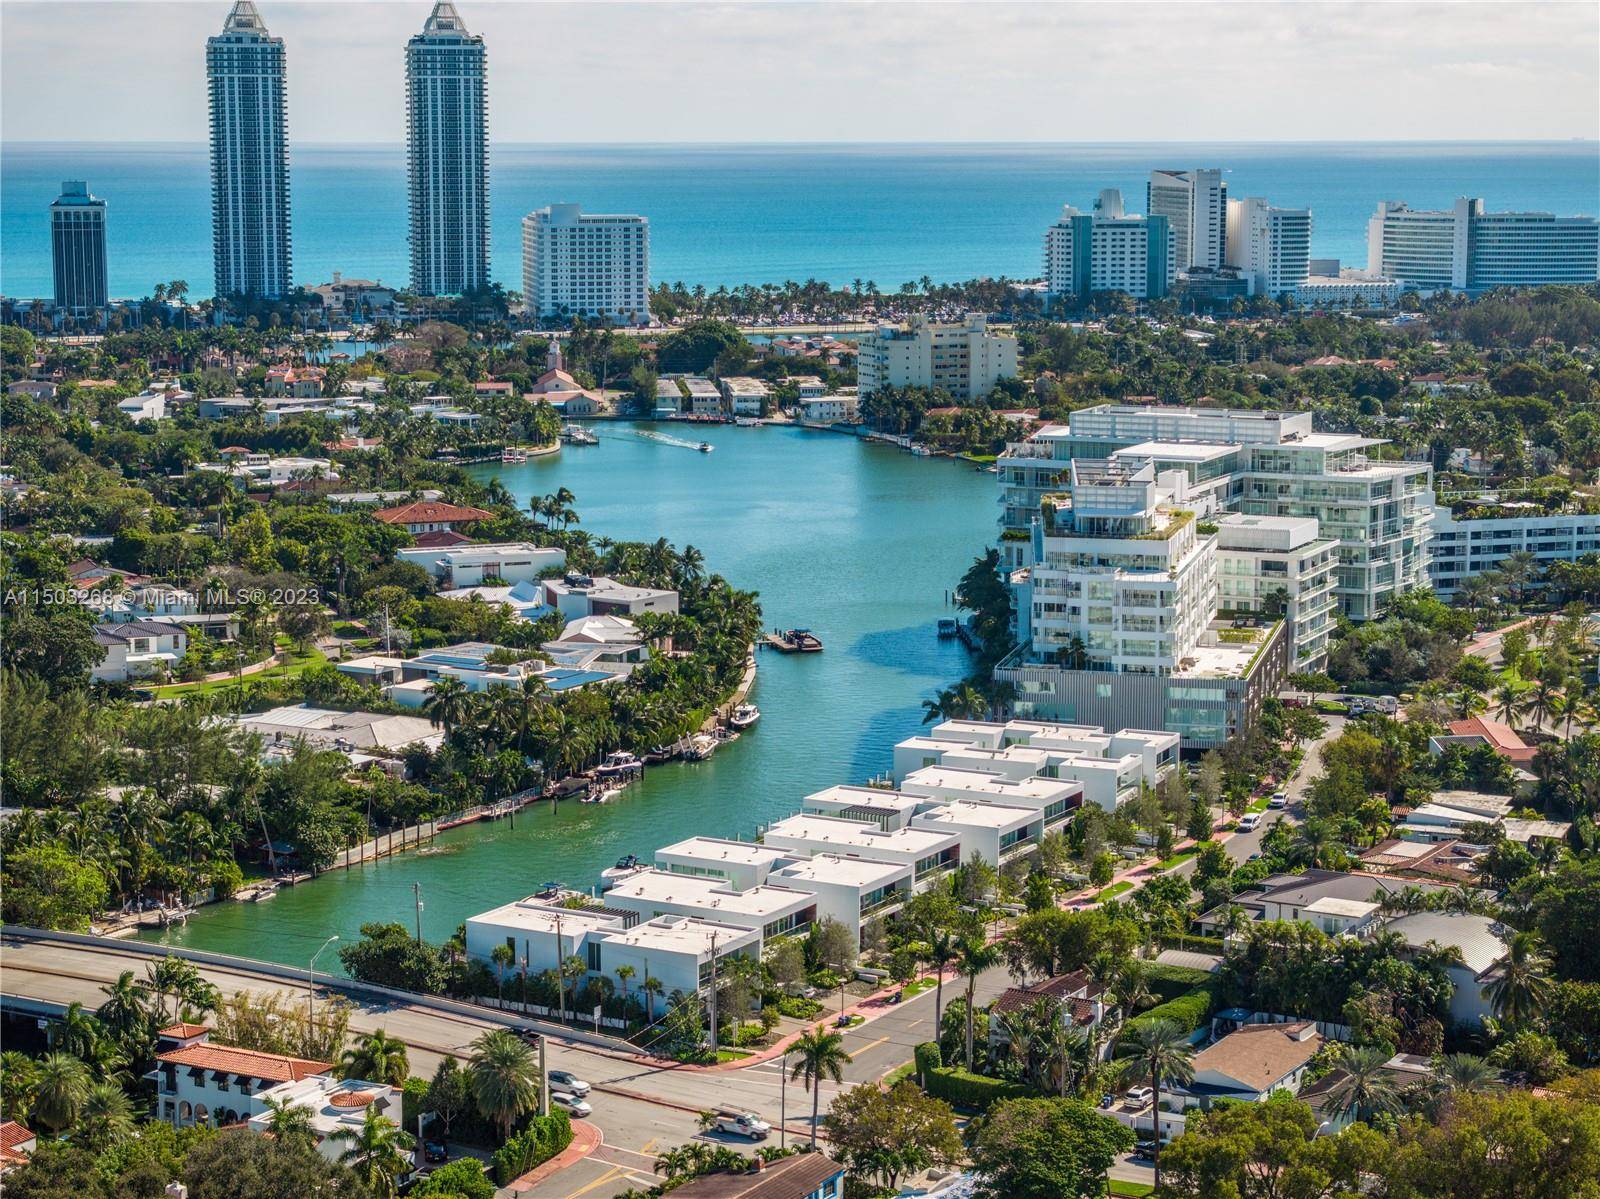 Experience the ultimate waterfront luxury Villa at the Ritz Carlton Residences in Miami Beach.